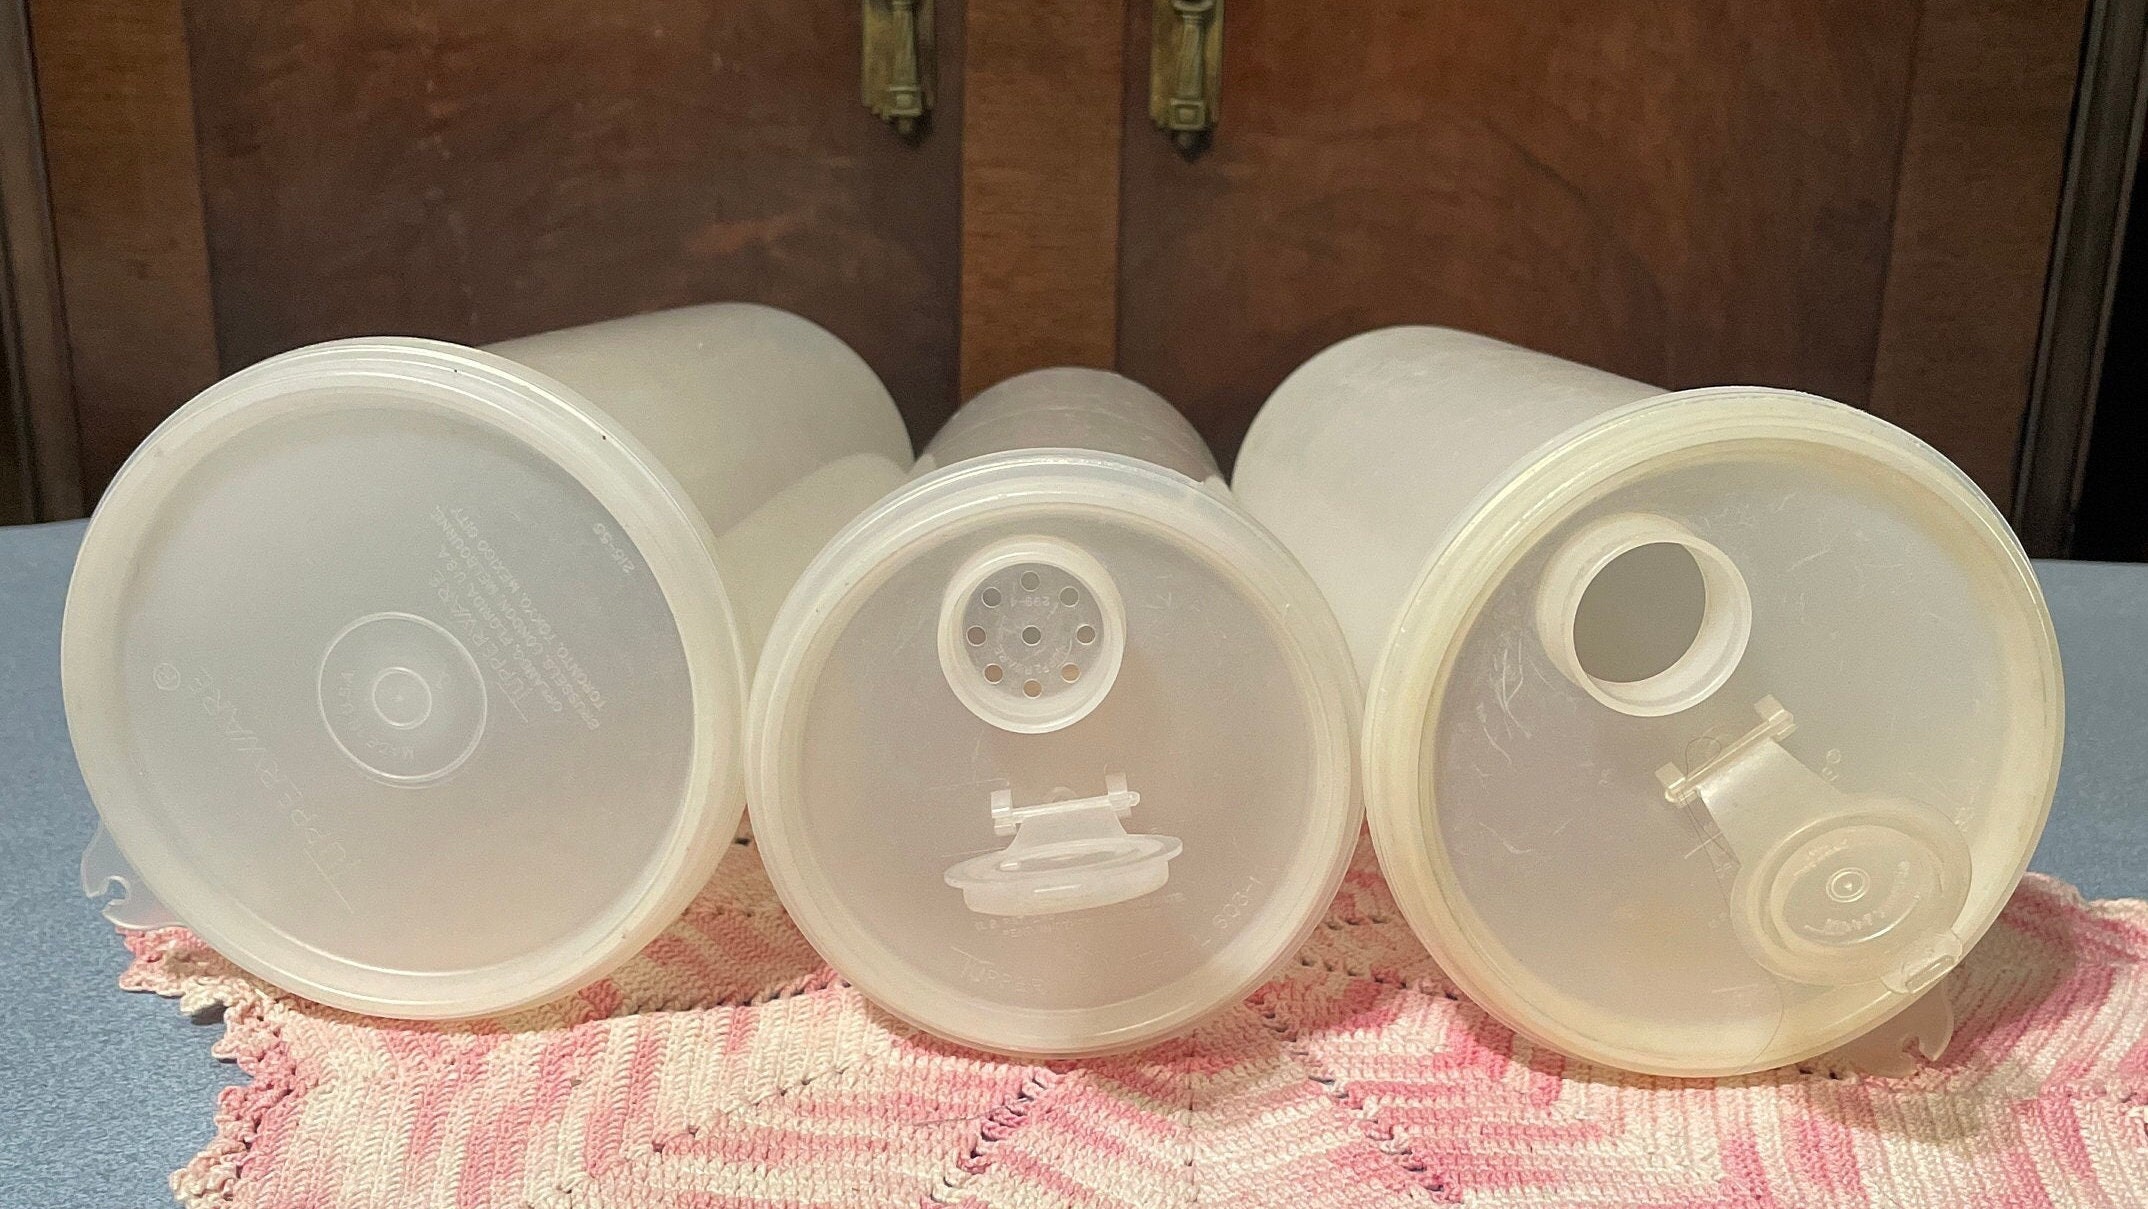 Vintage Tupperware Storage Containers and Lids, Options Are Tall or Short  Container and Style of Lid, Preowned 